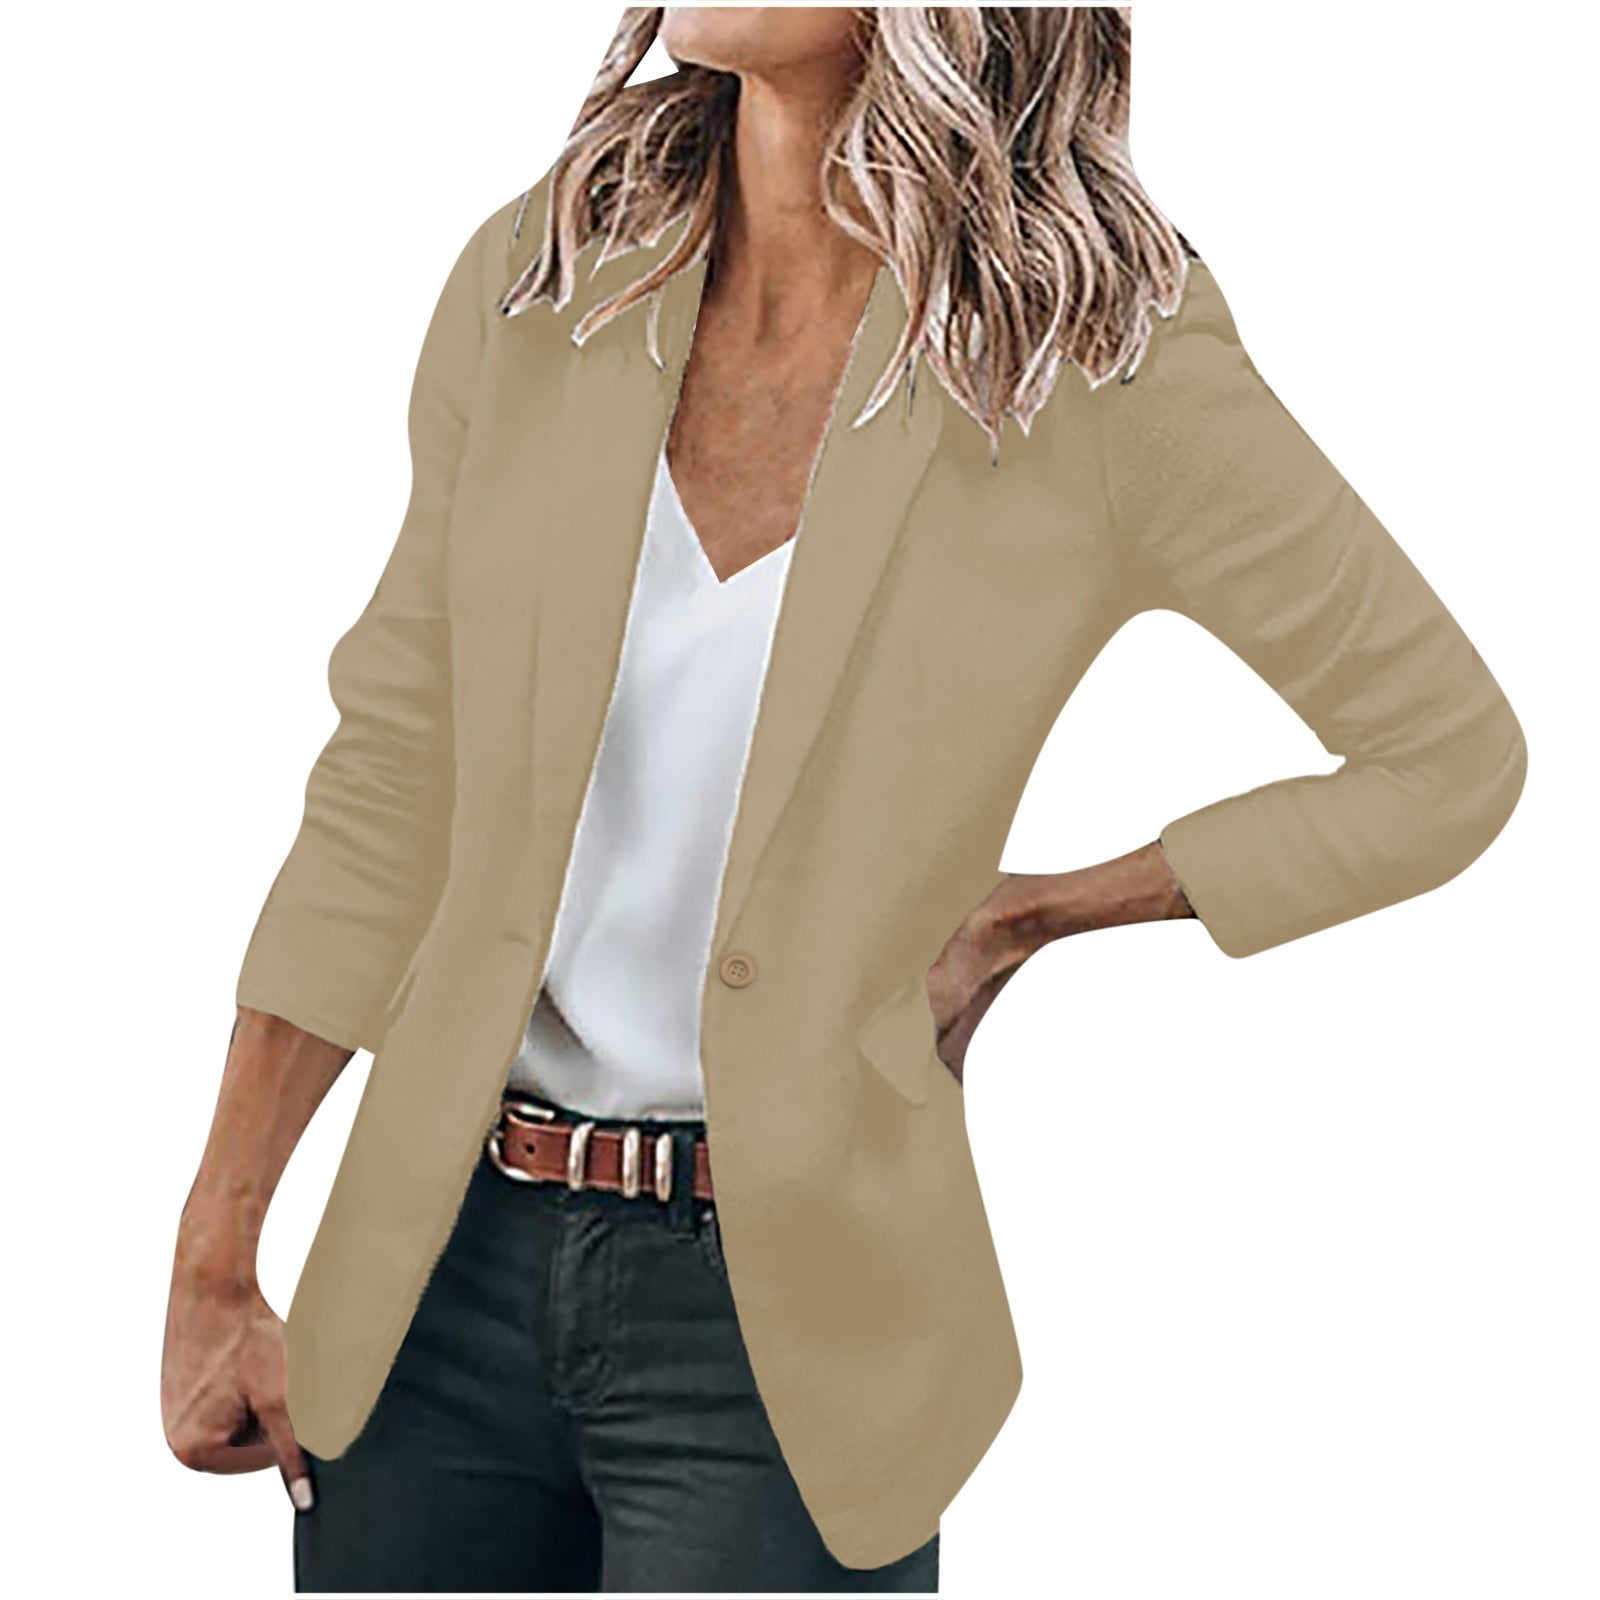  Women's Fall Jacket Oversized Pocket,shirts under 10 dollars  for women,clothes under 10 dollars,non binary stuff,cheap stuff under 3  dollars,bathing suit for women plus size clearance,1 cent items : Clothing,  Shoes 